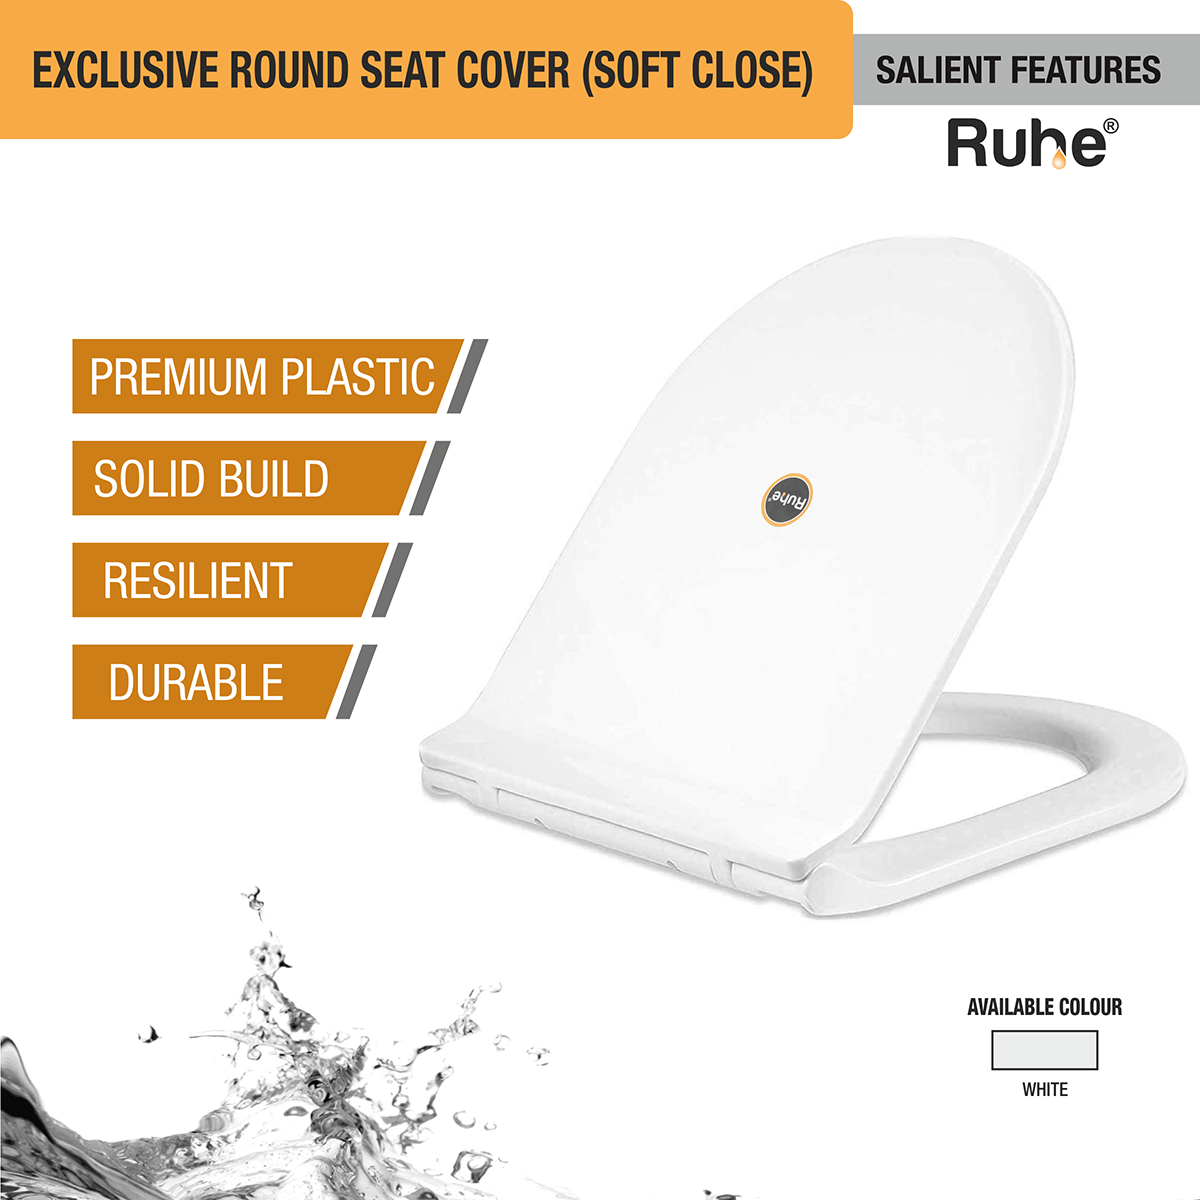 Exclusive Round Toilet Seat Cover (White) (Soft Close) features and benefits